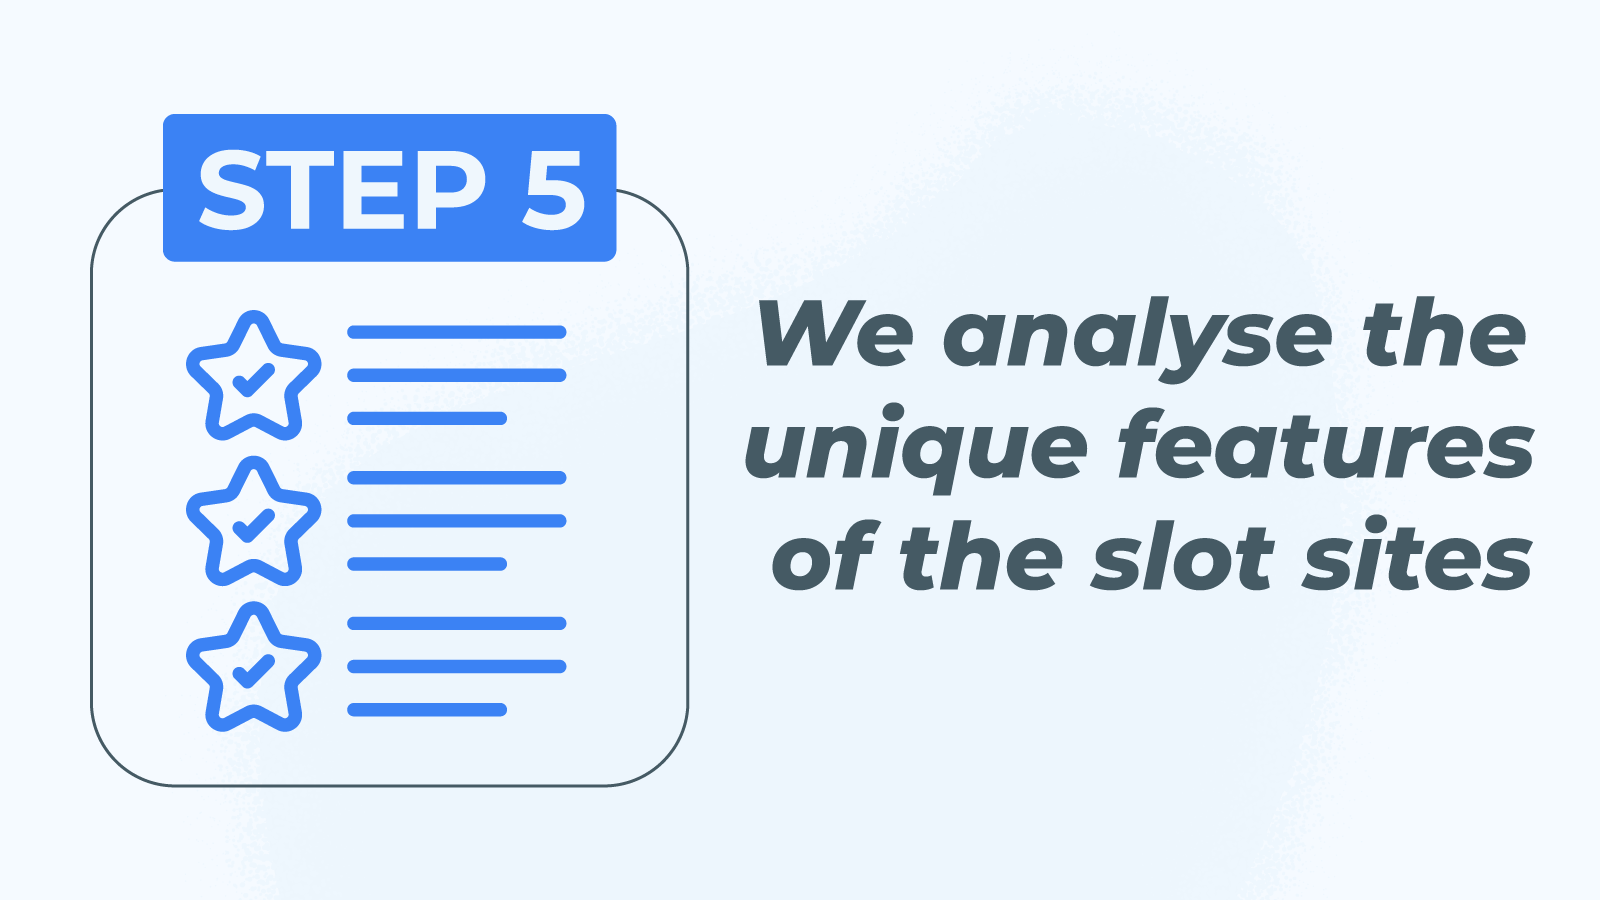 We analyse the unique features of the slot sites